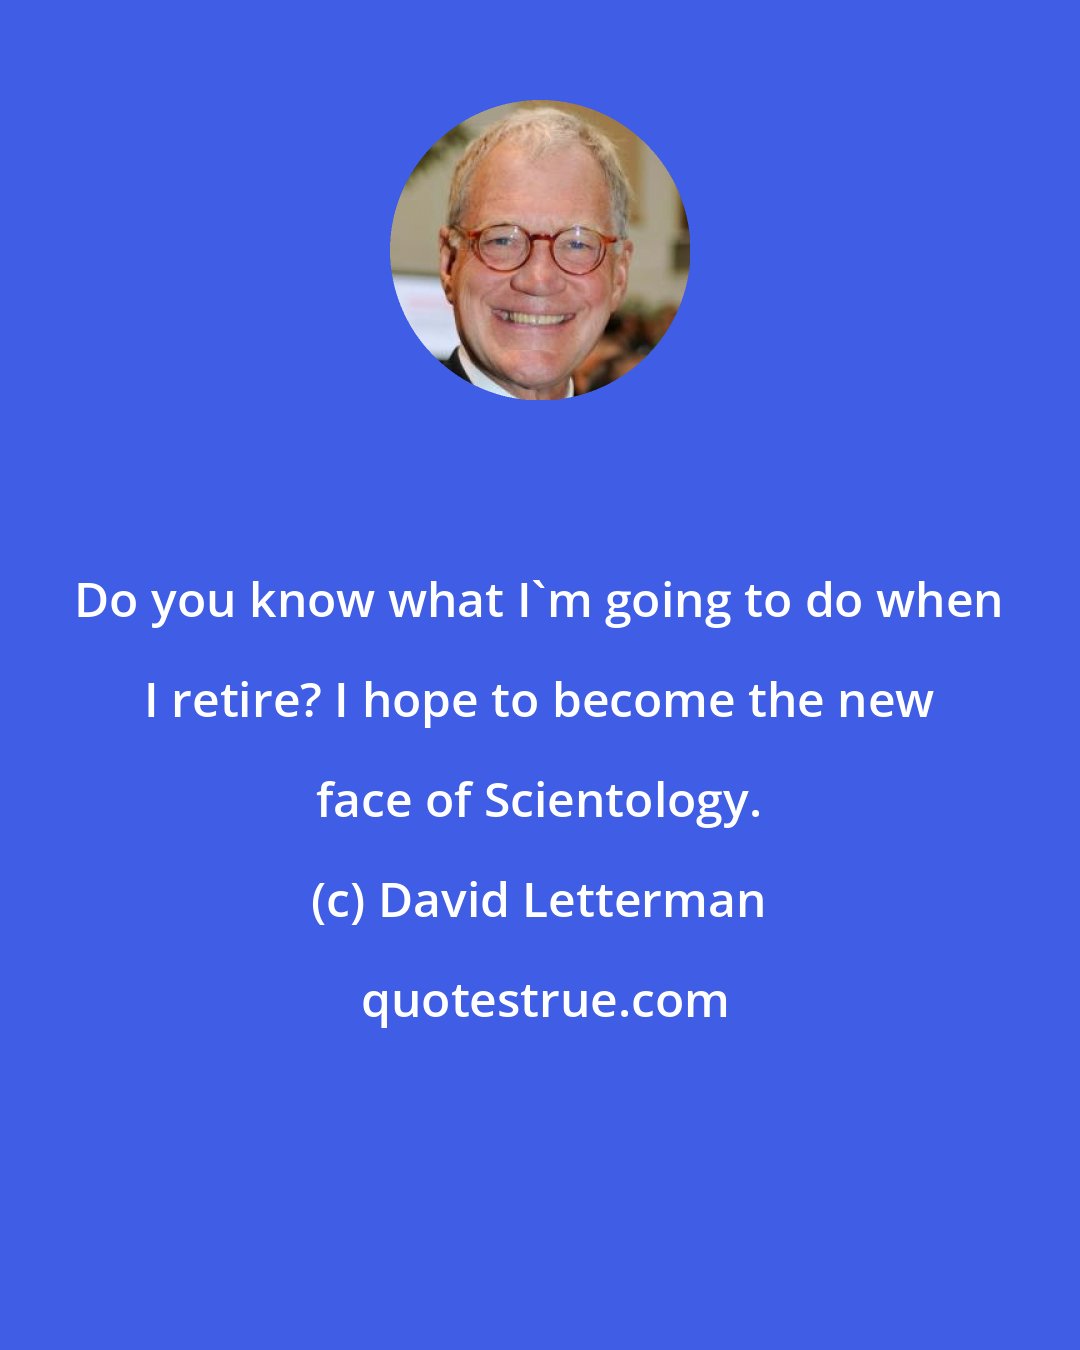 David Letterman: Do you know what I'm going to do when I retire? I hope to become the new face of Scientology.